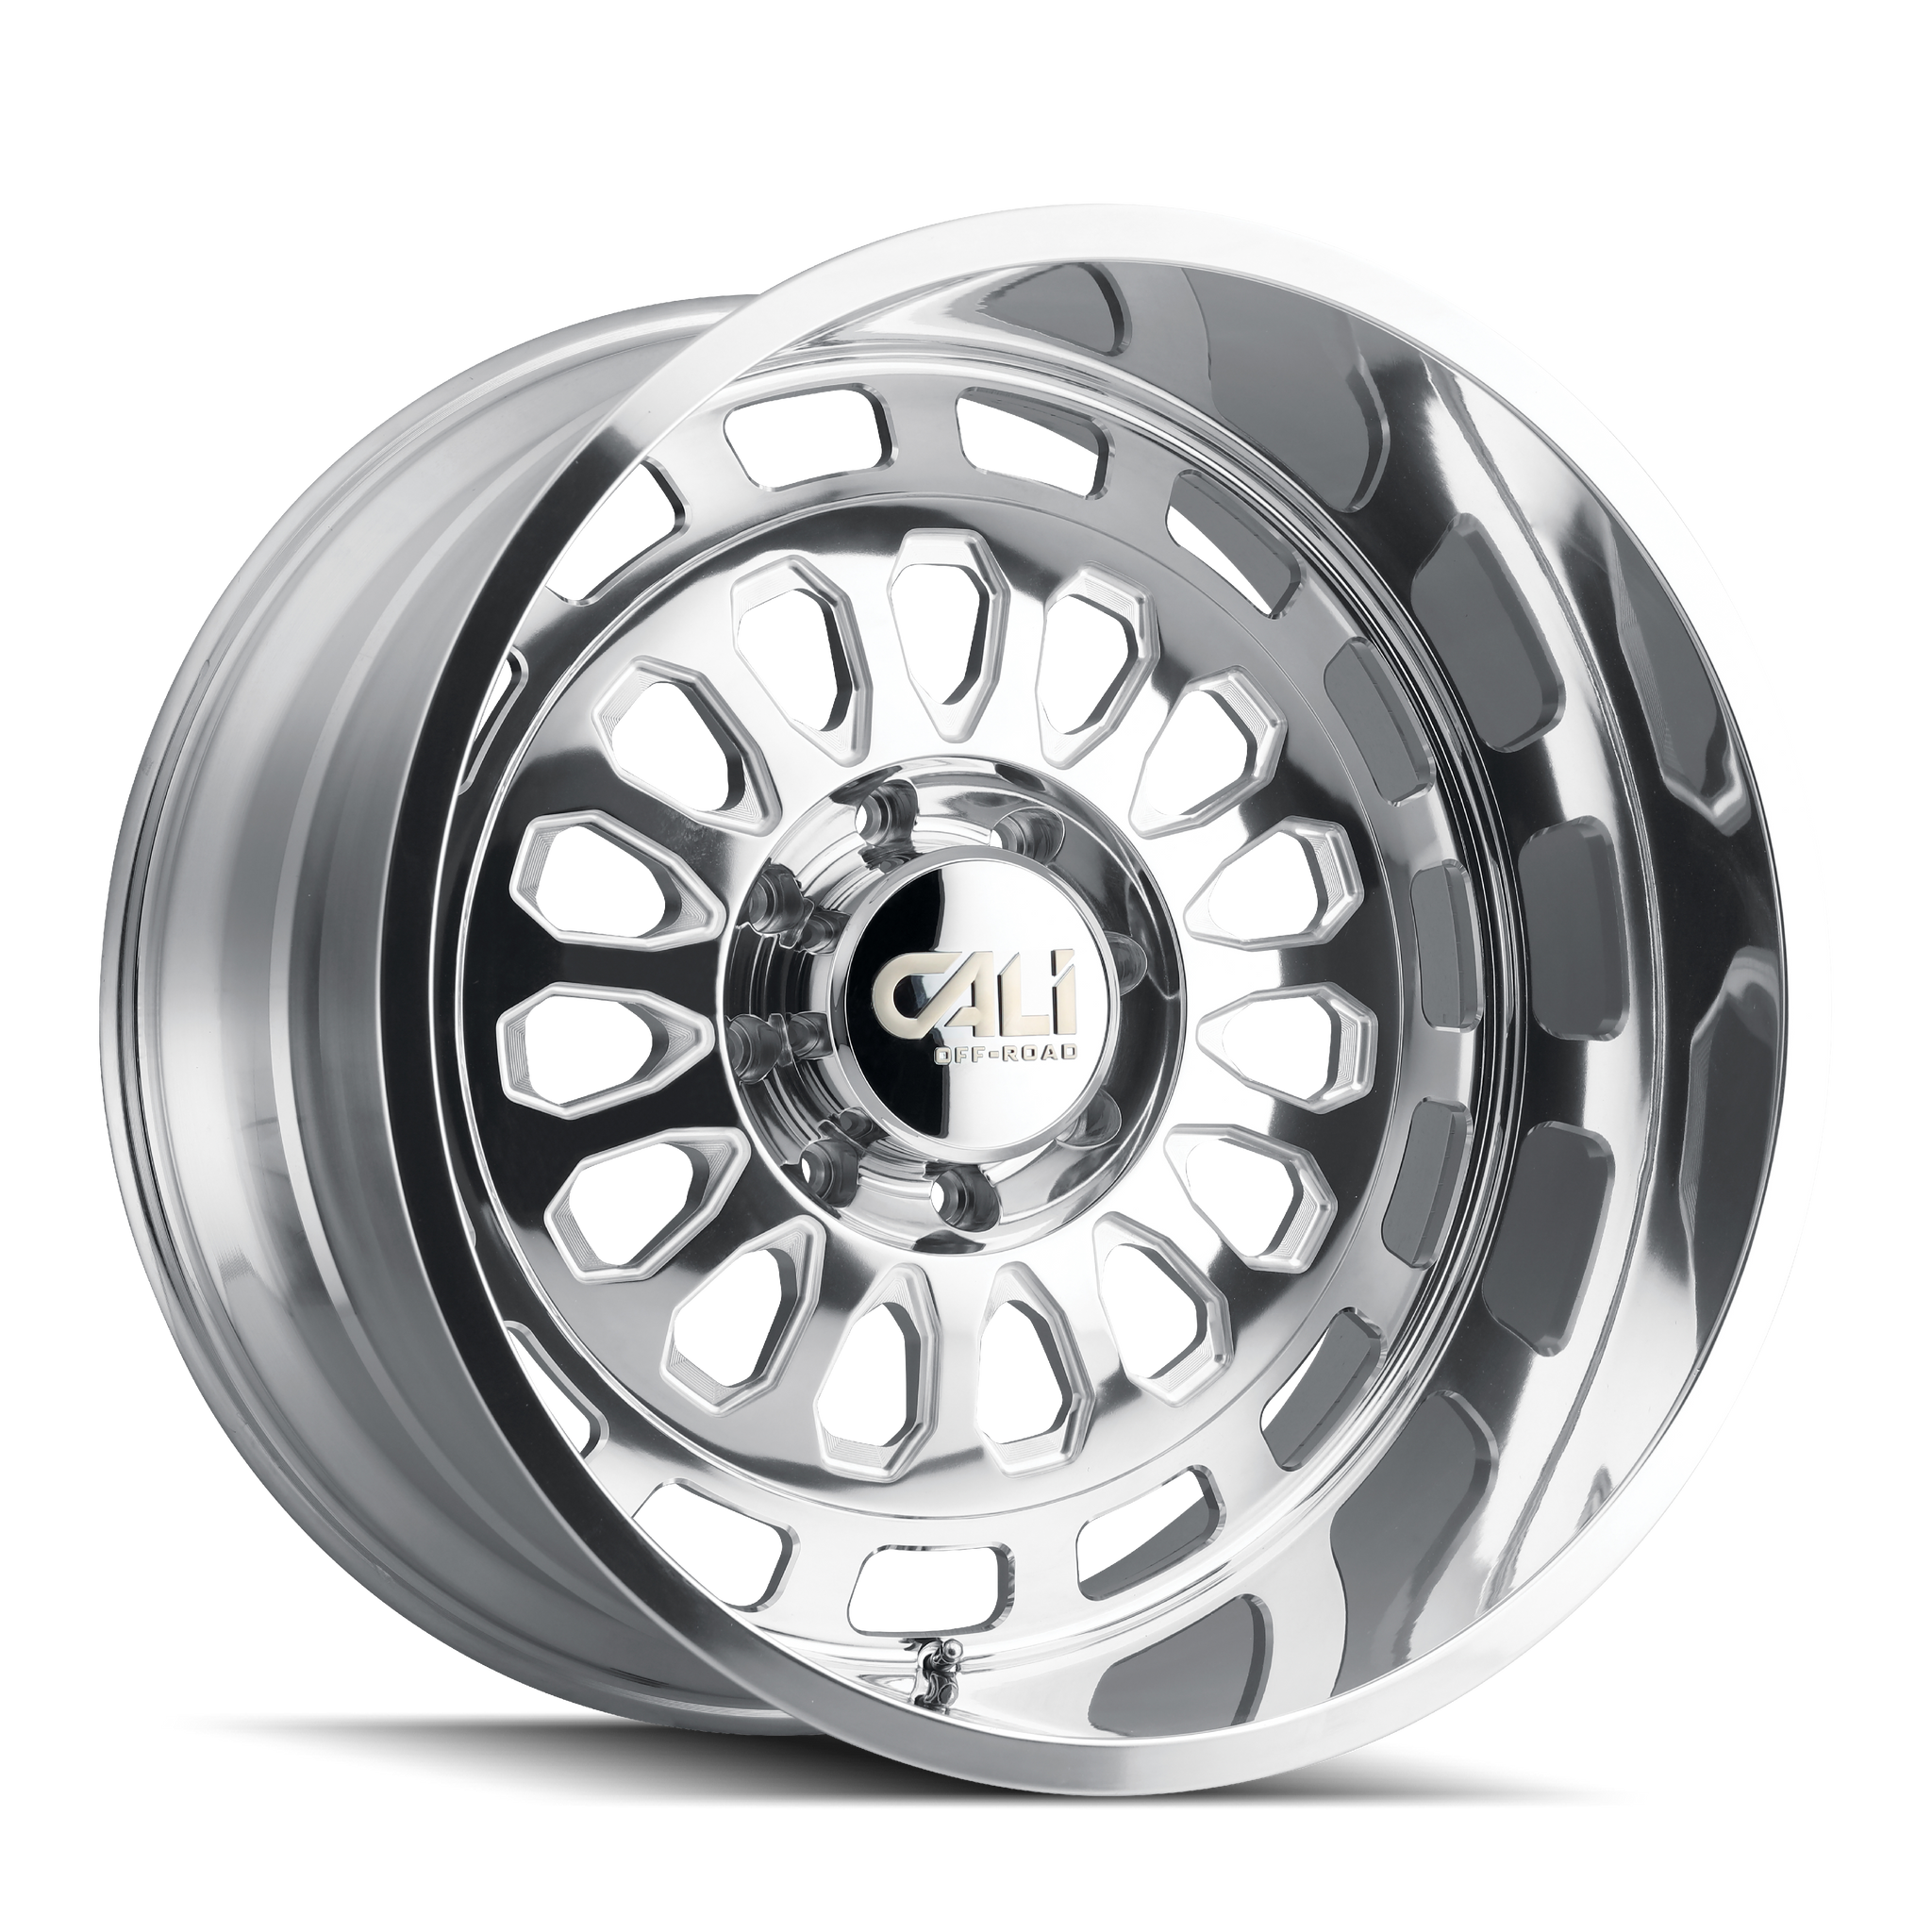 CALI OFF-ROAD PARADOX 9113 20X10 -25MM 6x139.7 106MM POLISHED/MILLED SPOKES